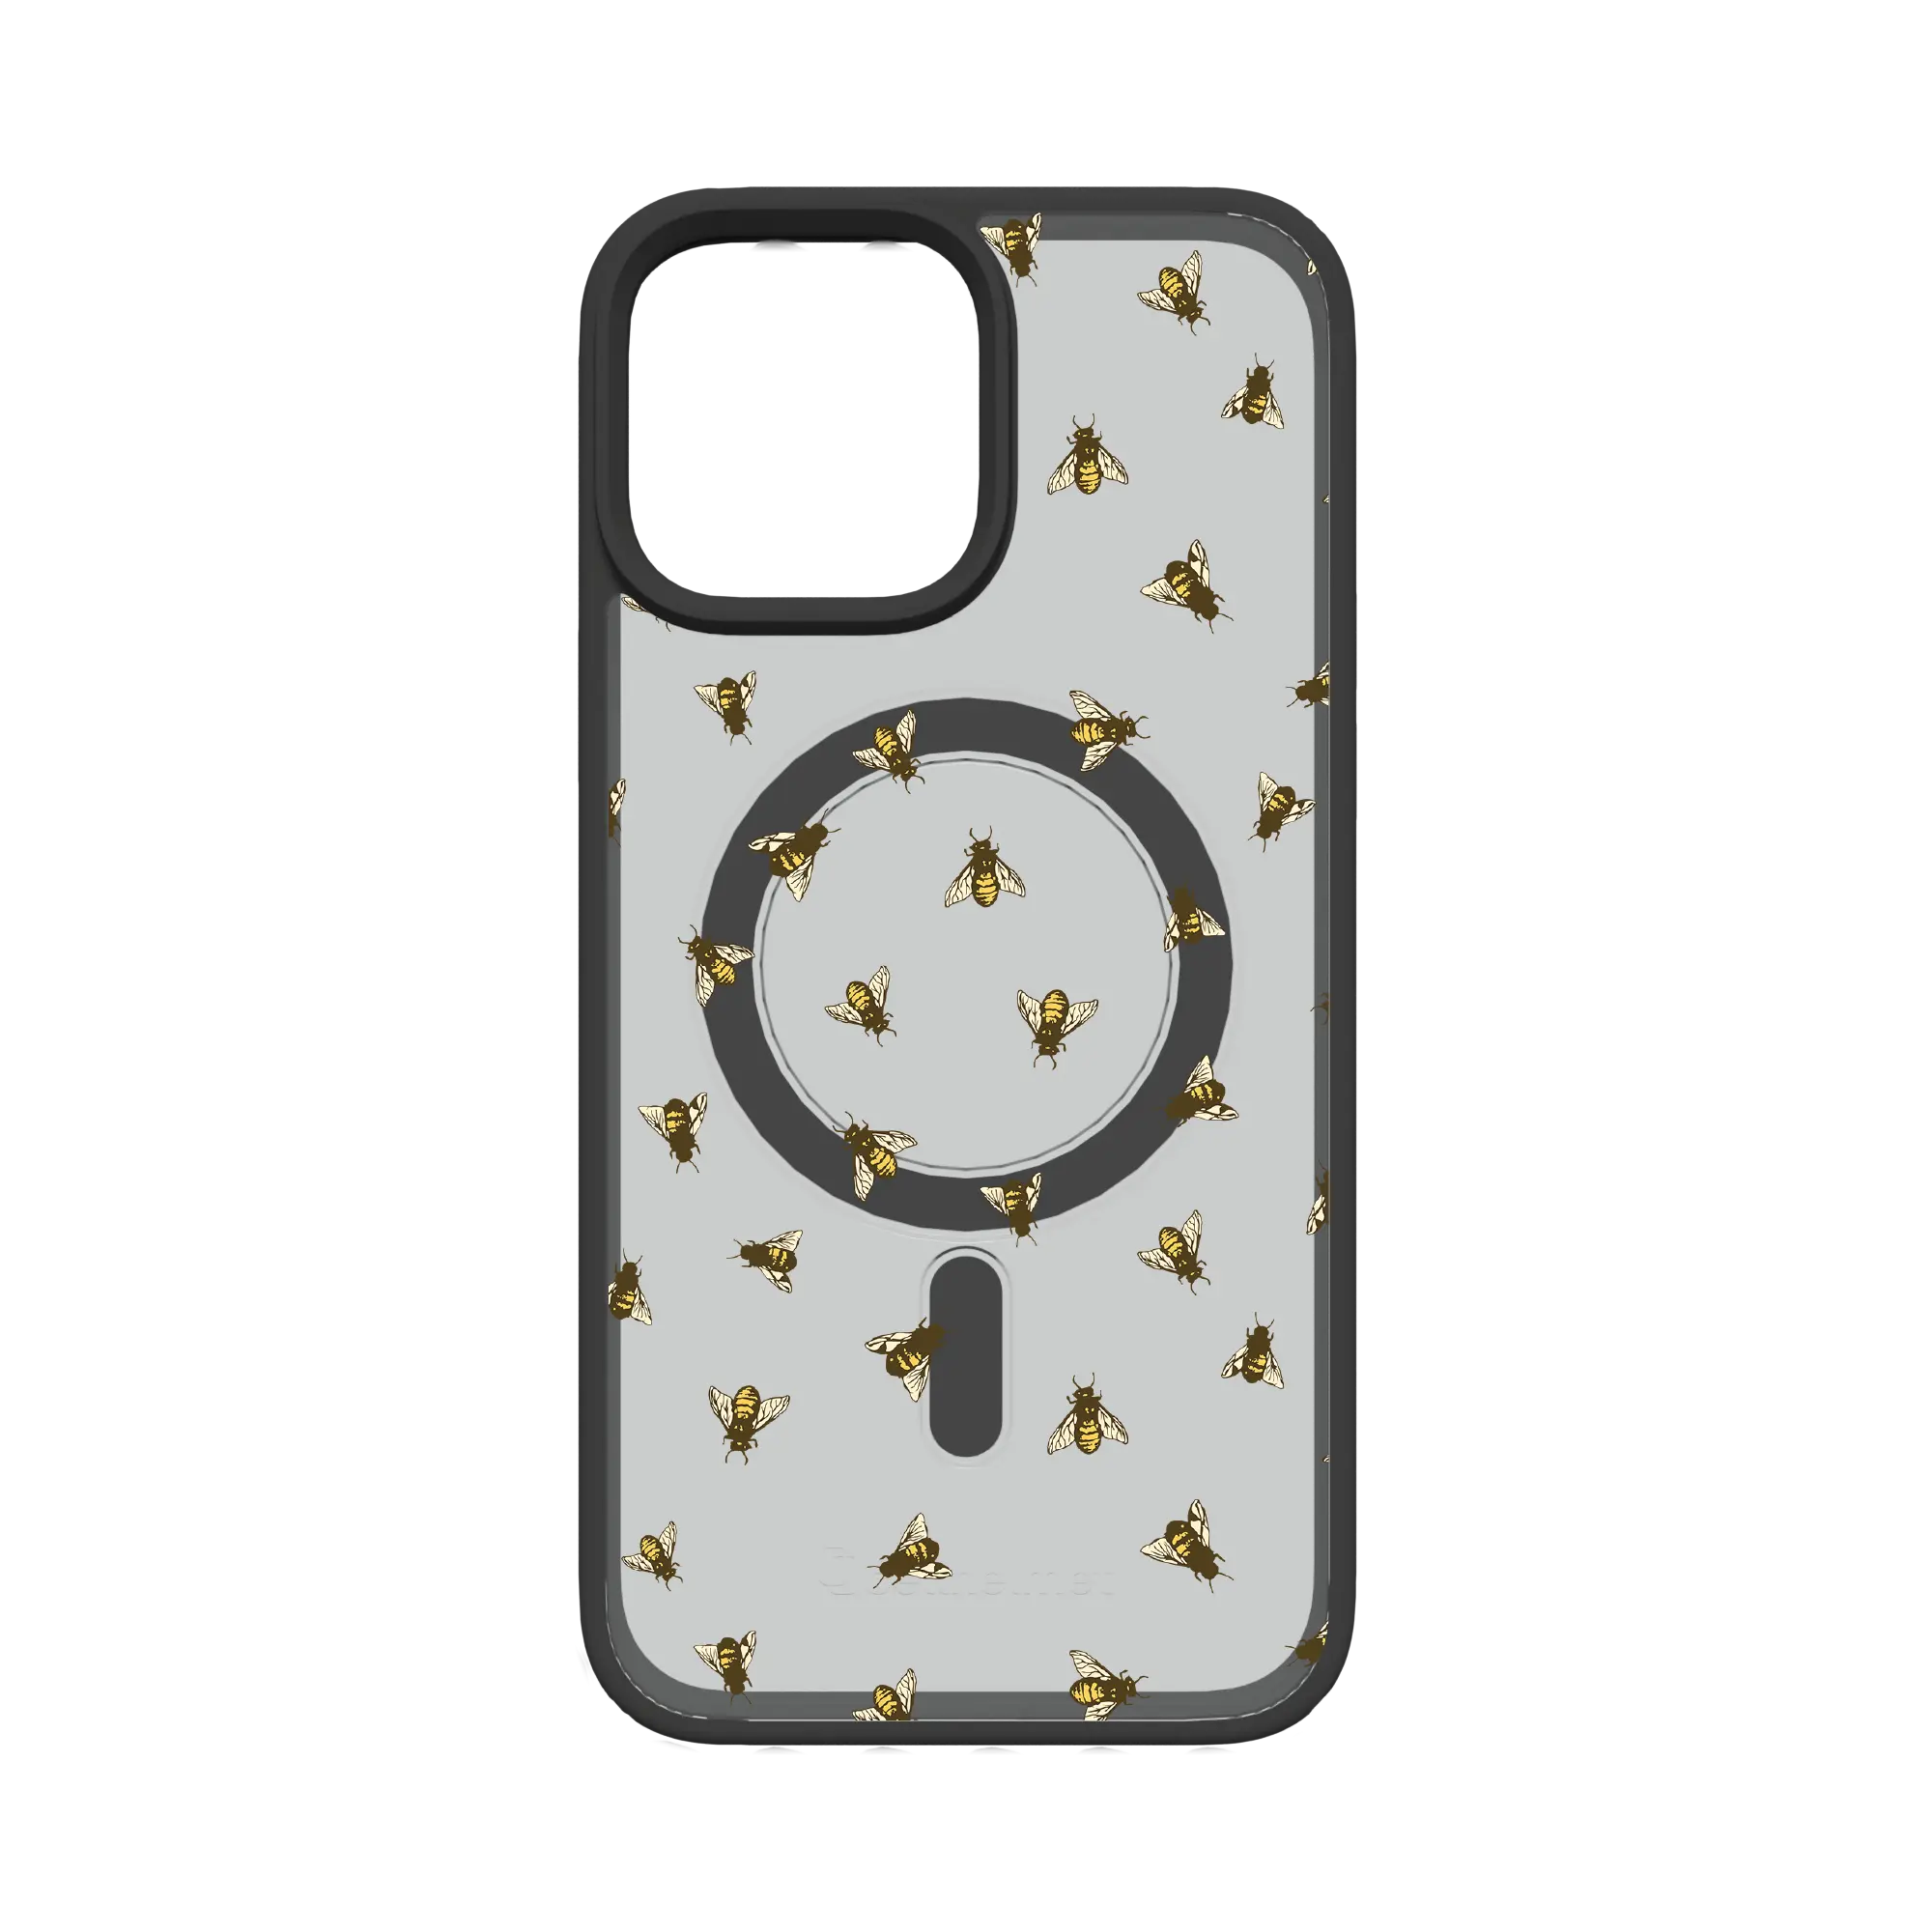 Apple-iPhone-12-Pro-Max-Crystal-Clear Sweet Like Honey | Protective MagSafe Bee Pattern Case | Birds and Bees Collection for Apple iPhone 12 Series cellhelmet cellhelmet